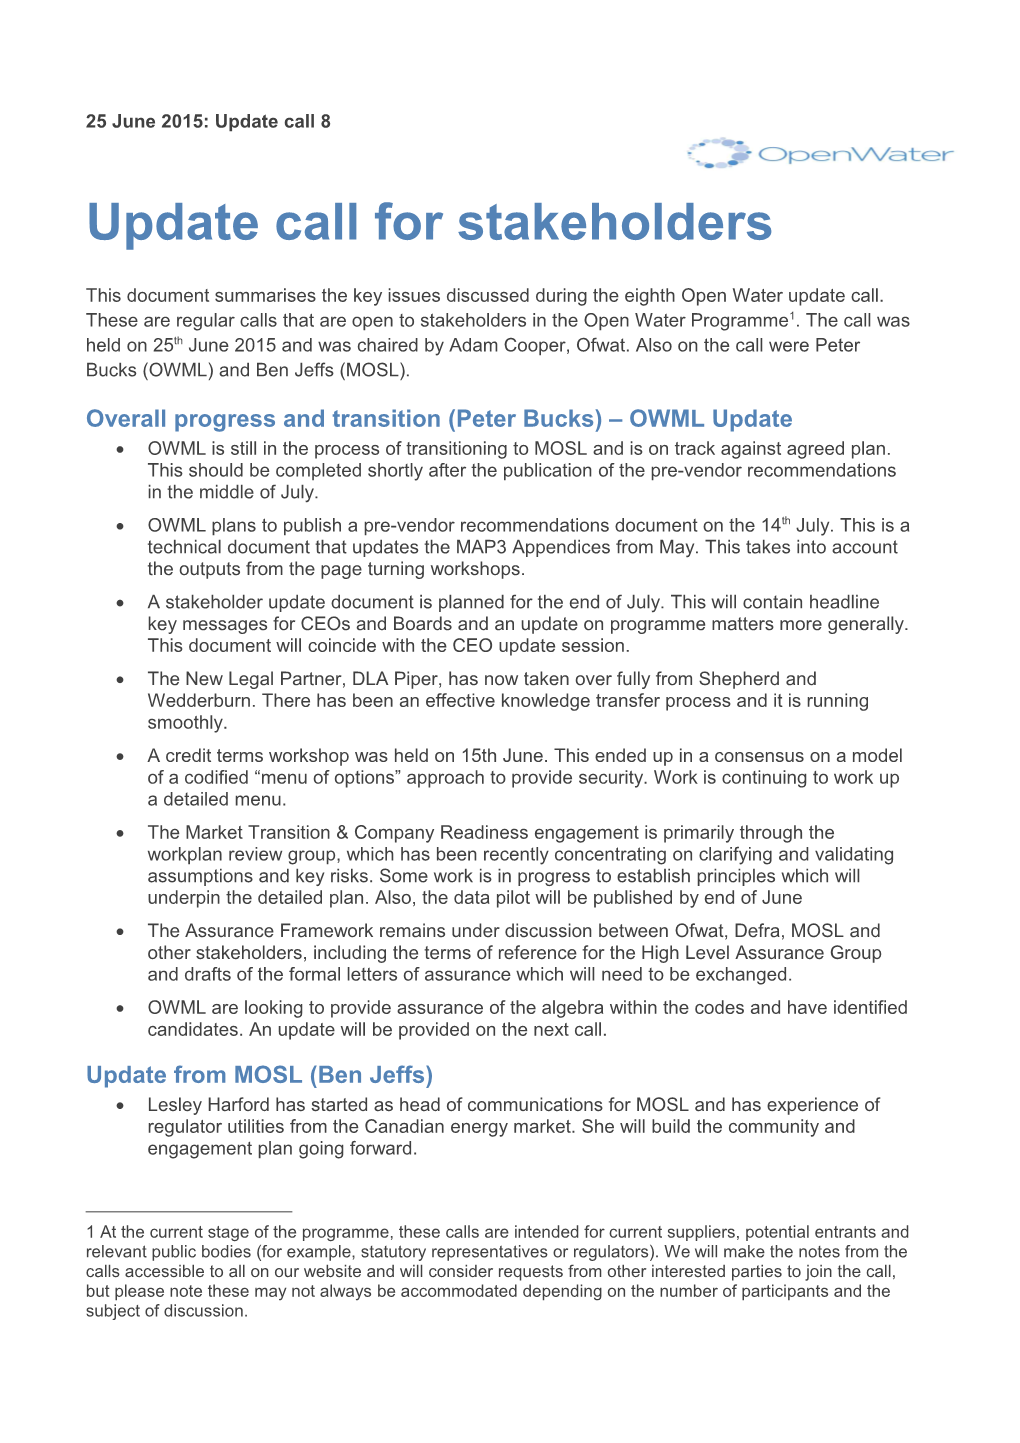 Update Call for Stakeholders s1